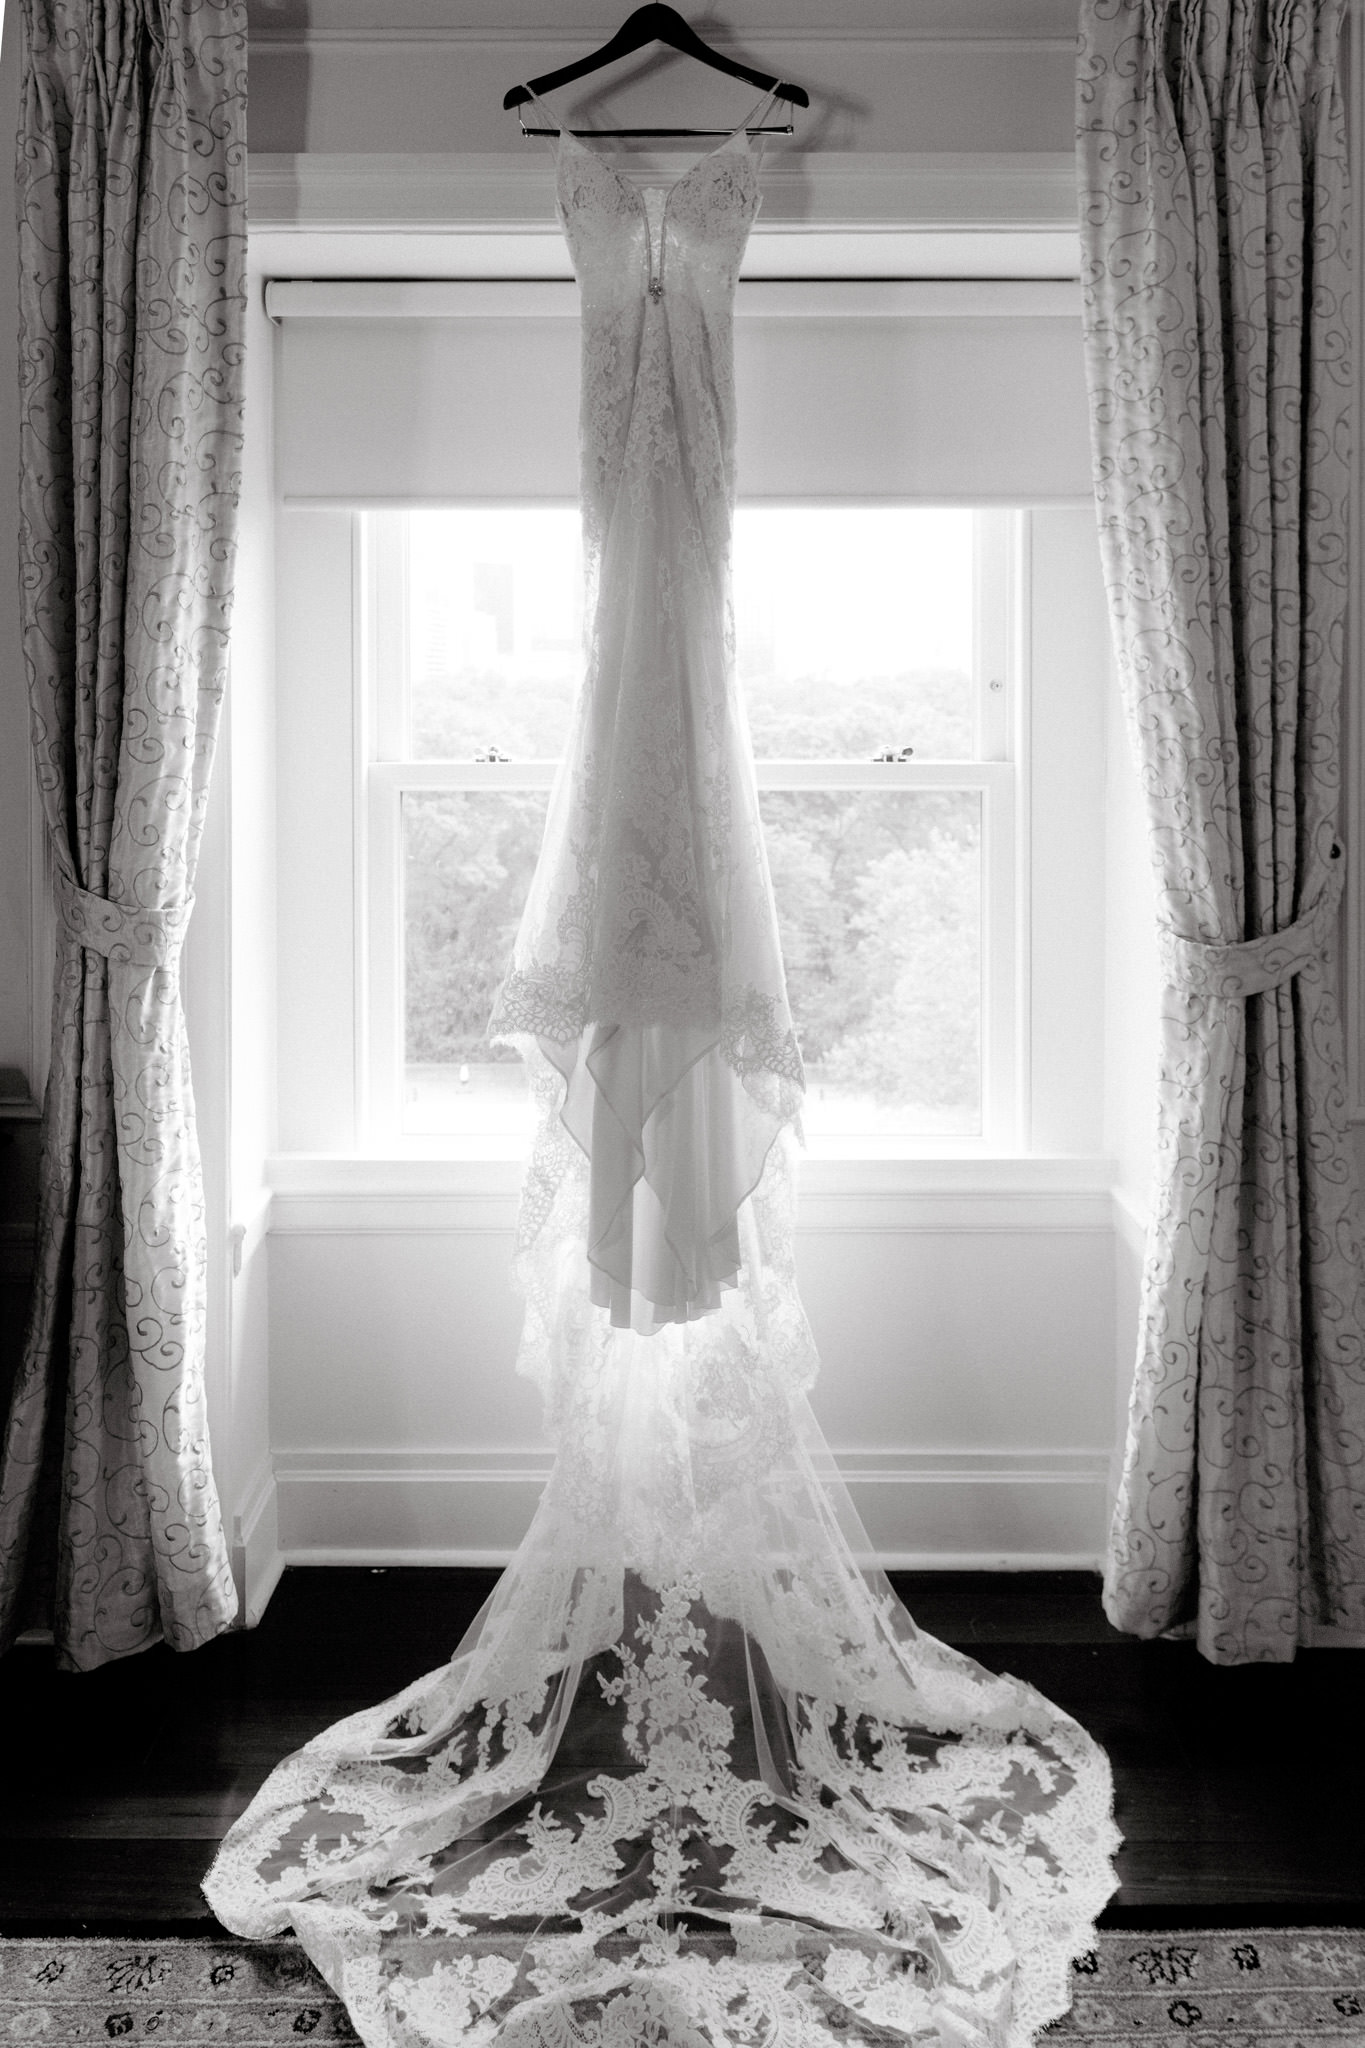 Wedding photographer Jenny Fu takes a photo of a wedding dress hanging in a window